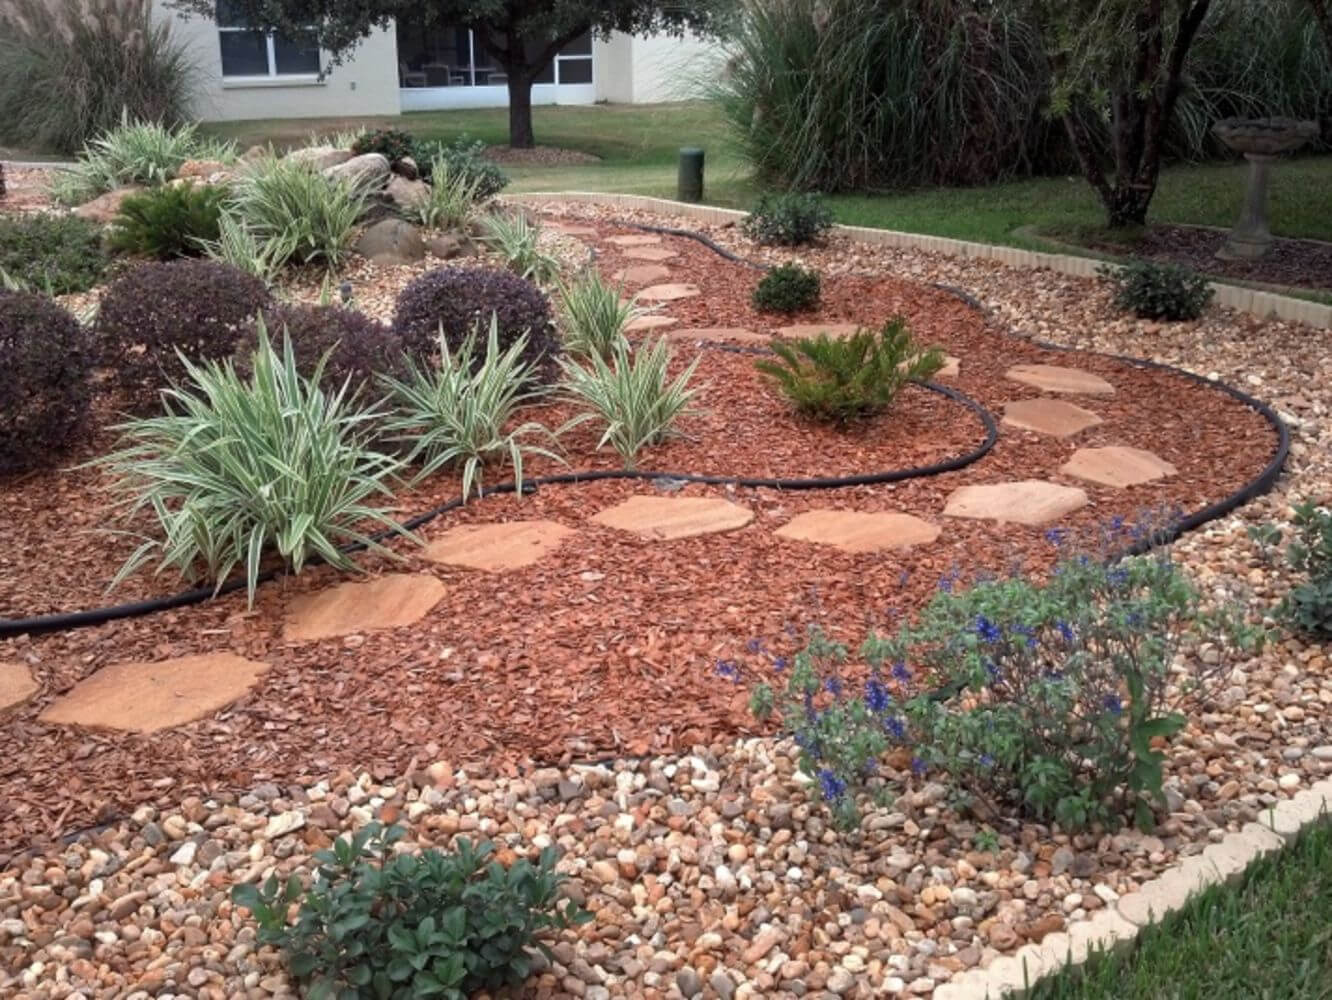 Landscaping Design Ideas Without Grass, How Do You Landscape A Small Front Yard Without Grass